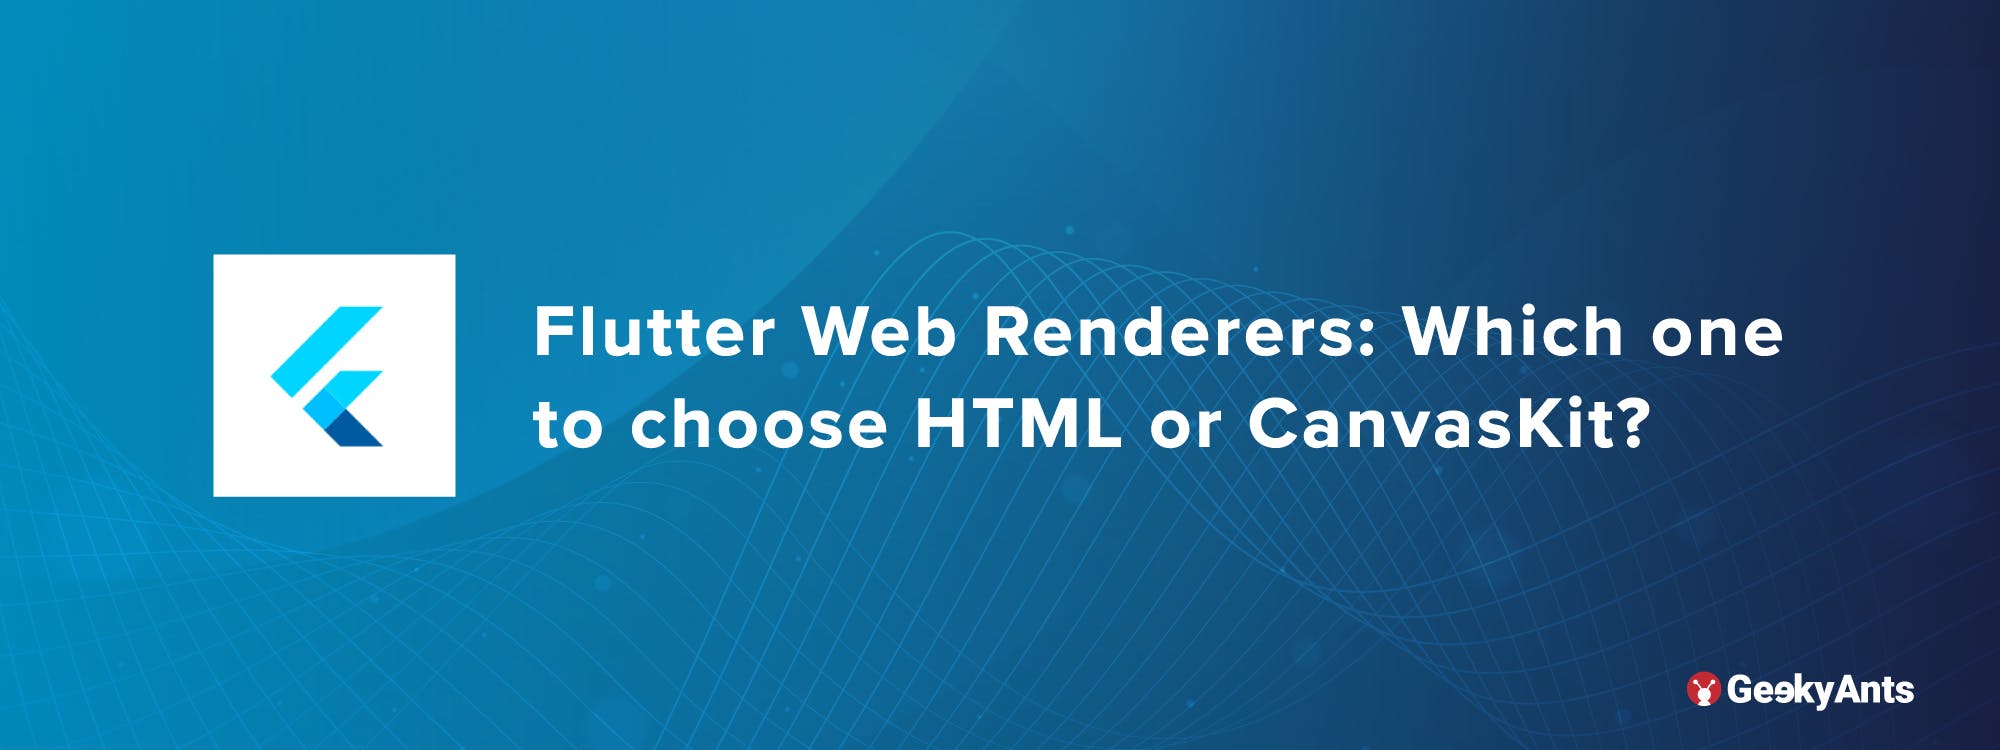 Web Renderers: Which One to Choose Html or Canvaskit?